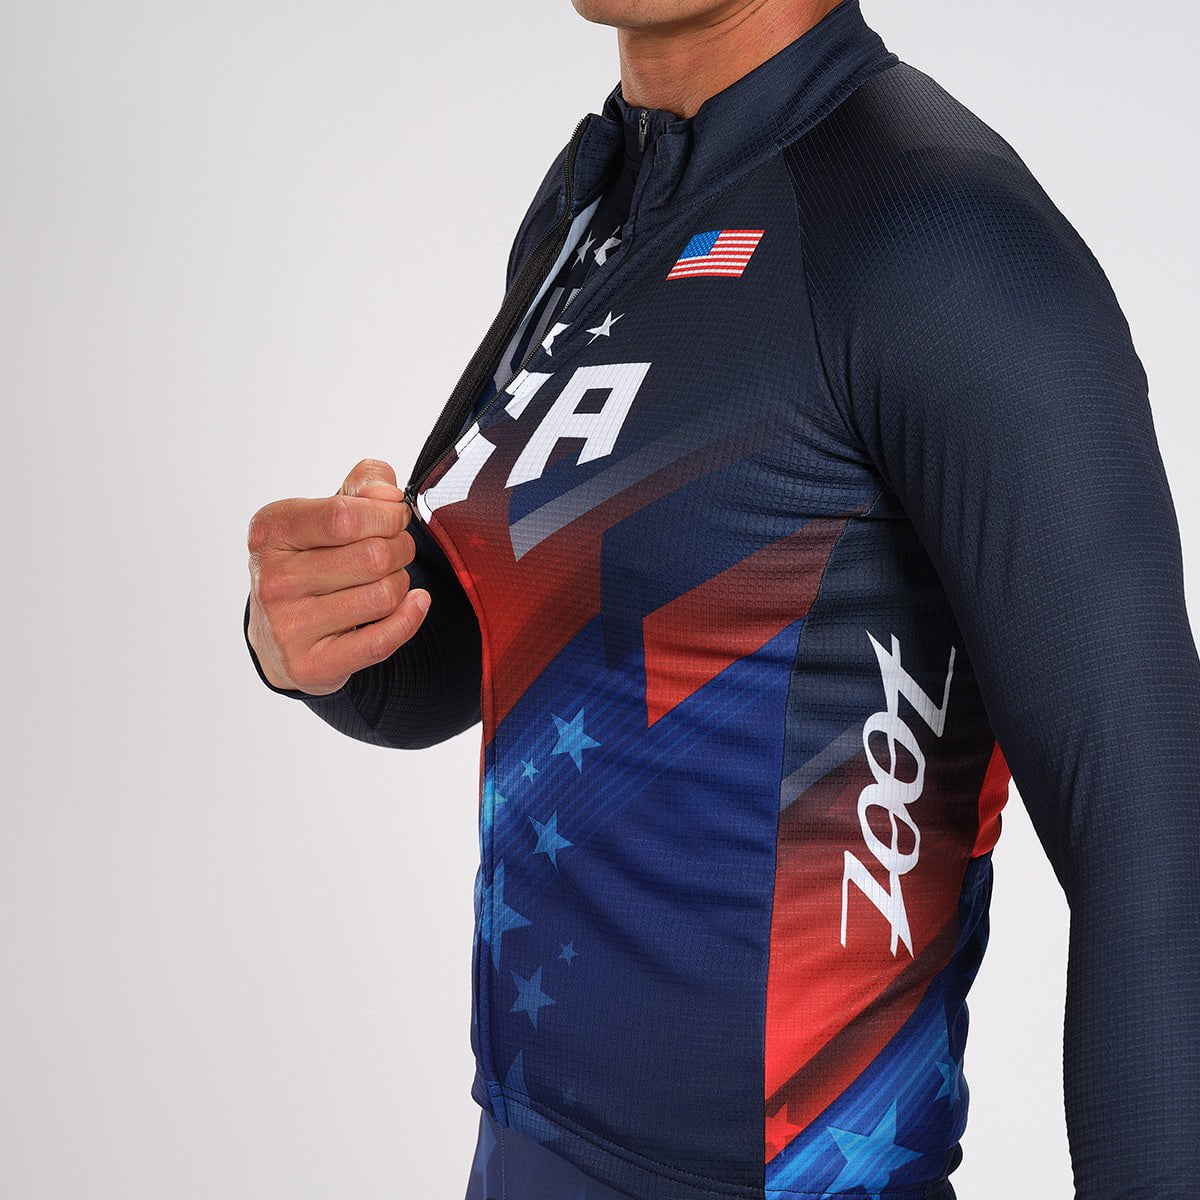 Zoot Sports CYCLE TOPS MENS LTD CYCLE THERMO JERSEY - TEAM USA